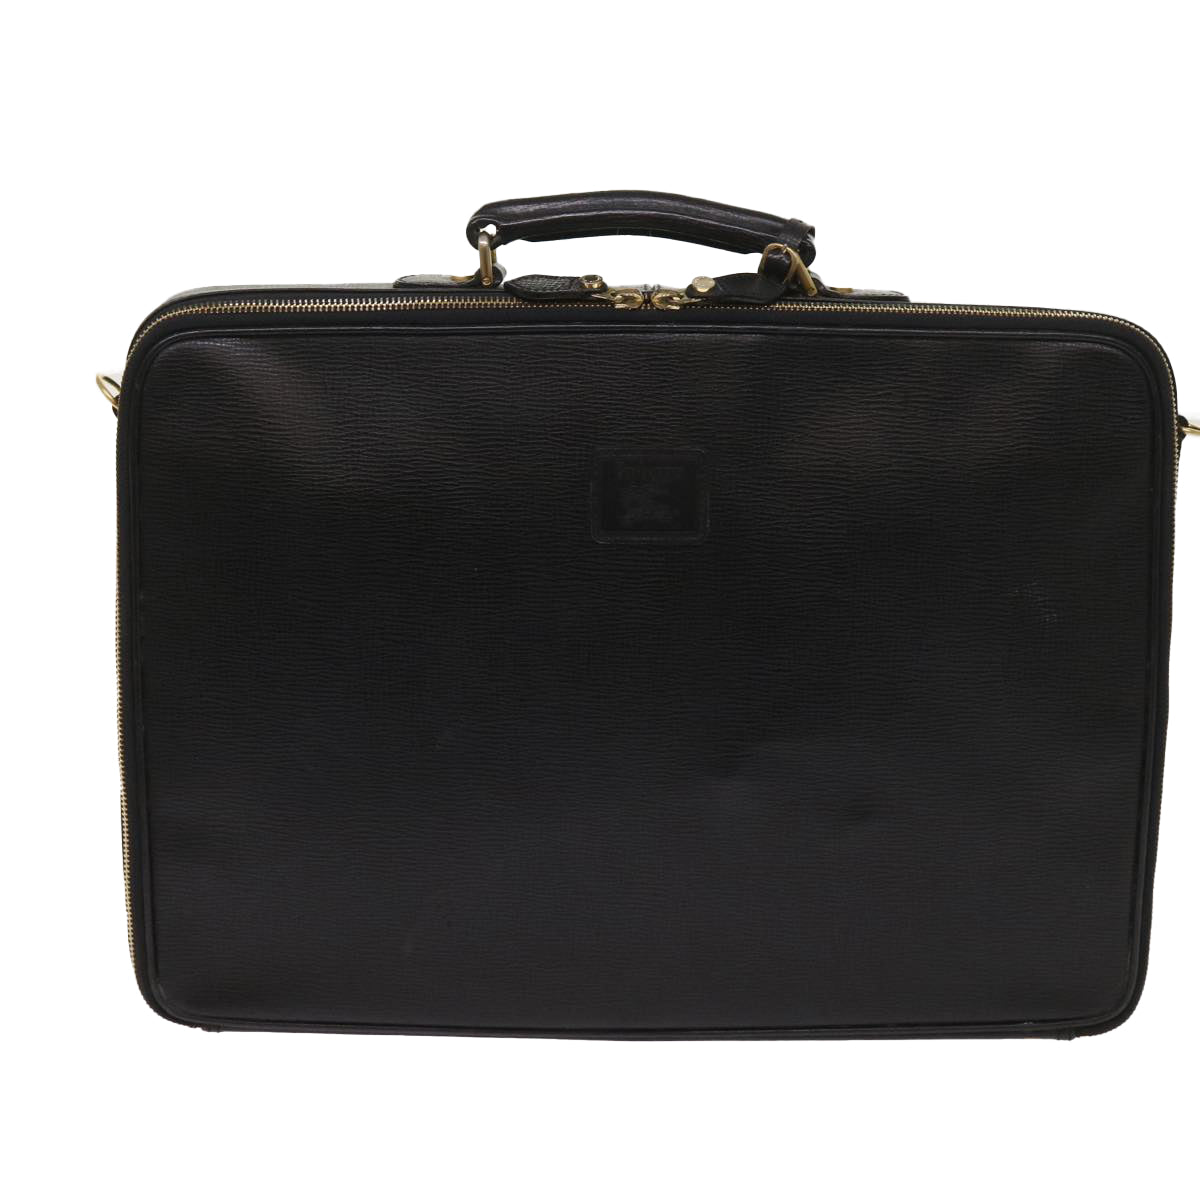 Burberrys Business Bag Leather 2way Black Auth ac2626